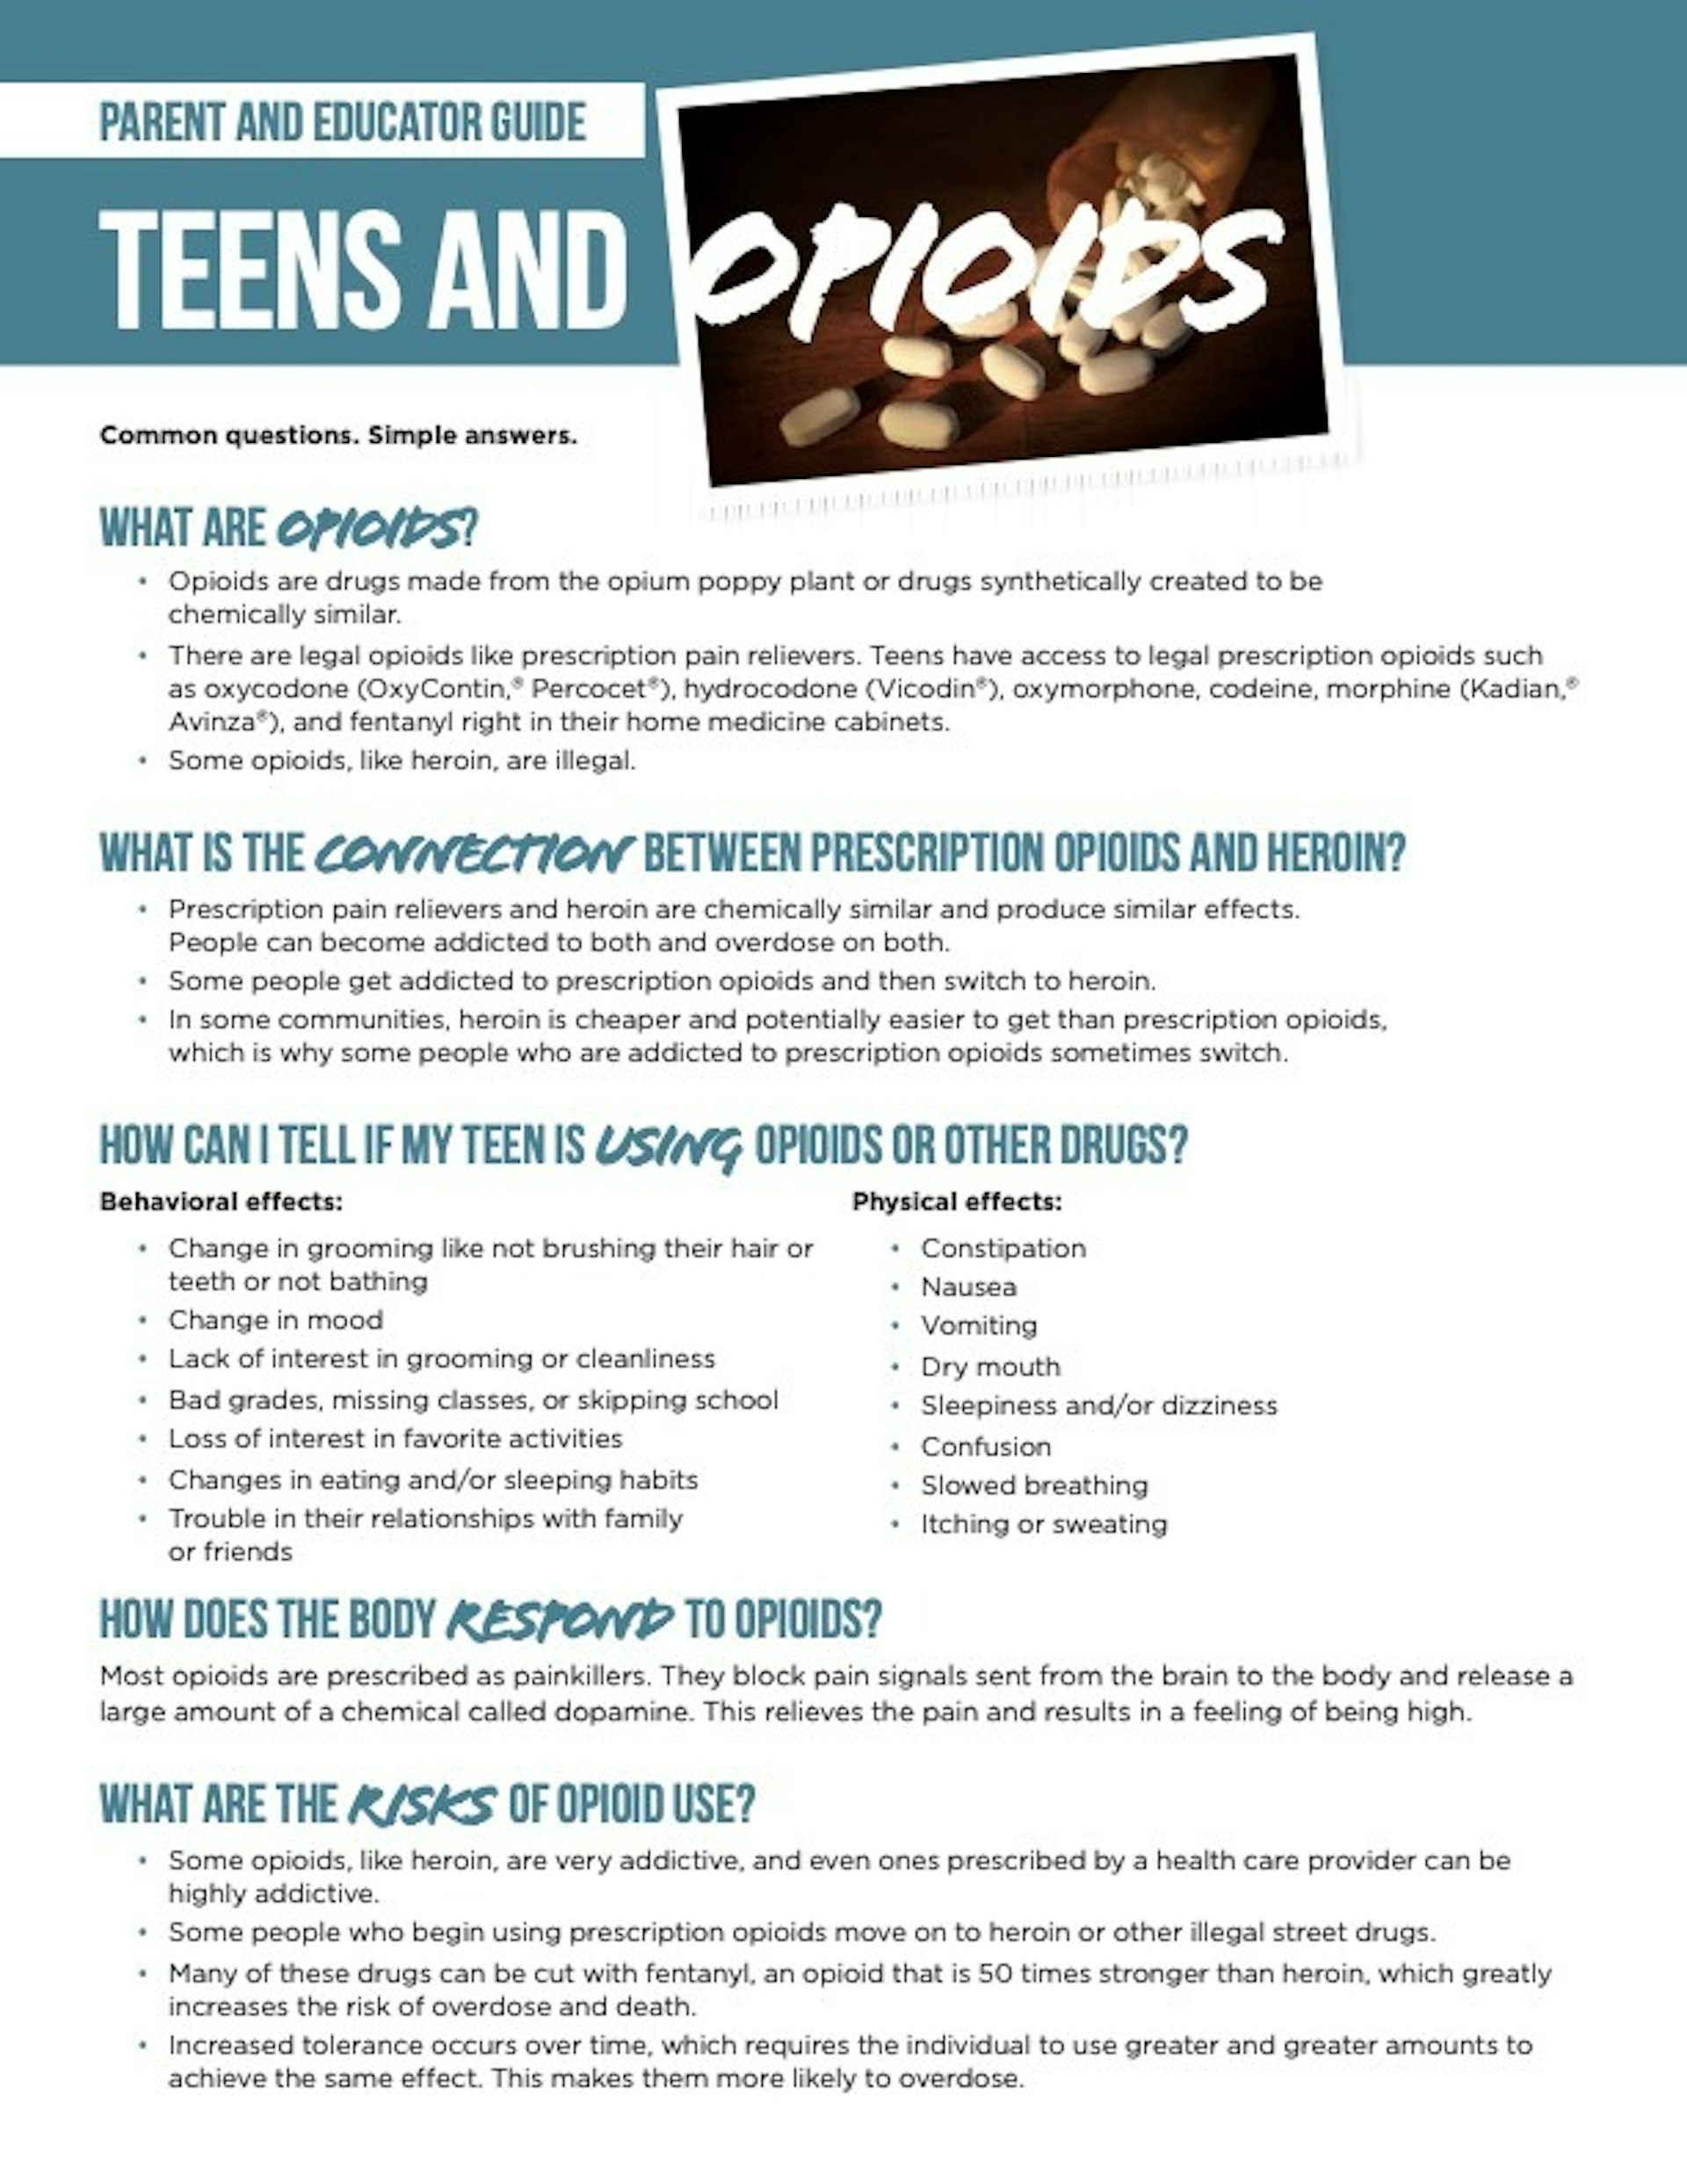 Teens and opioids